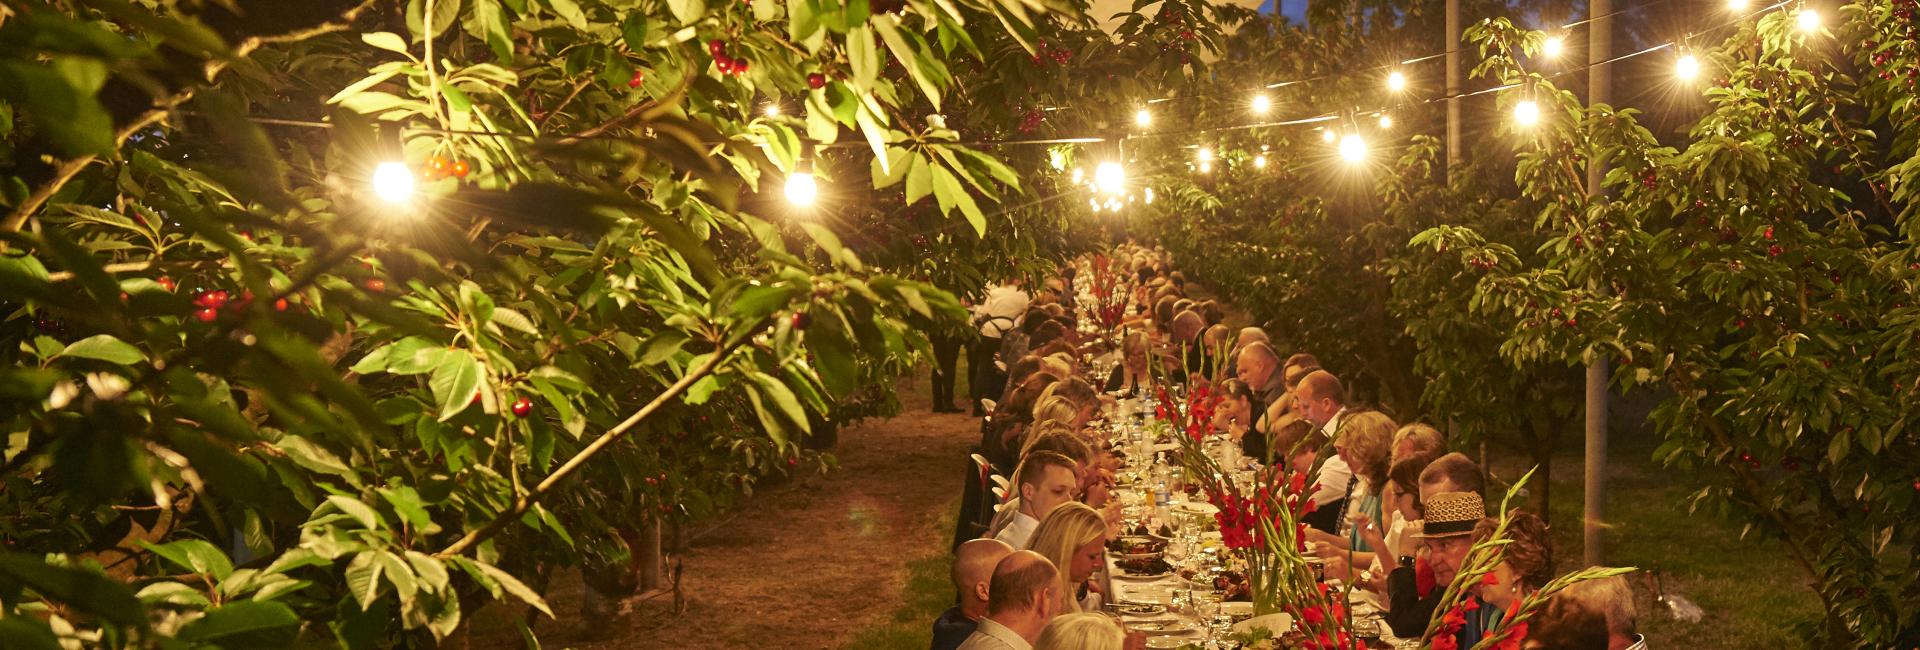 long table dinner outdoors with festoon lights